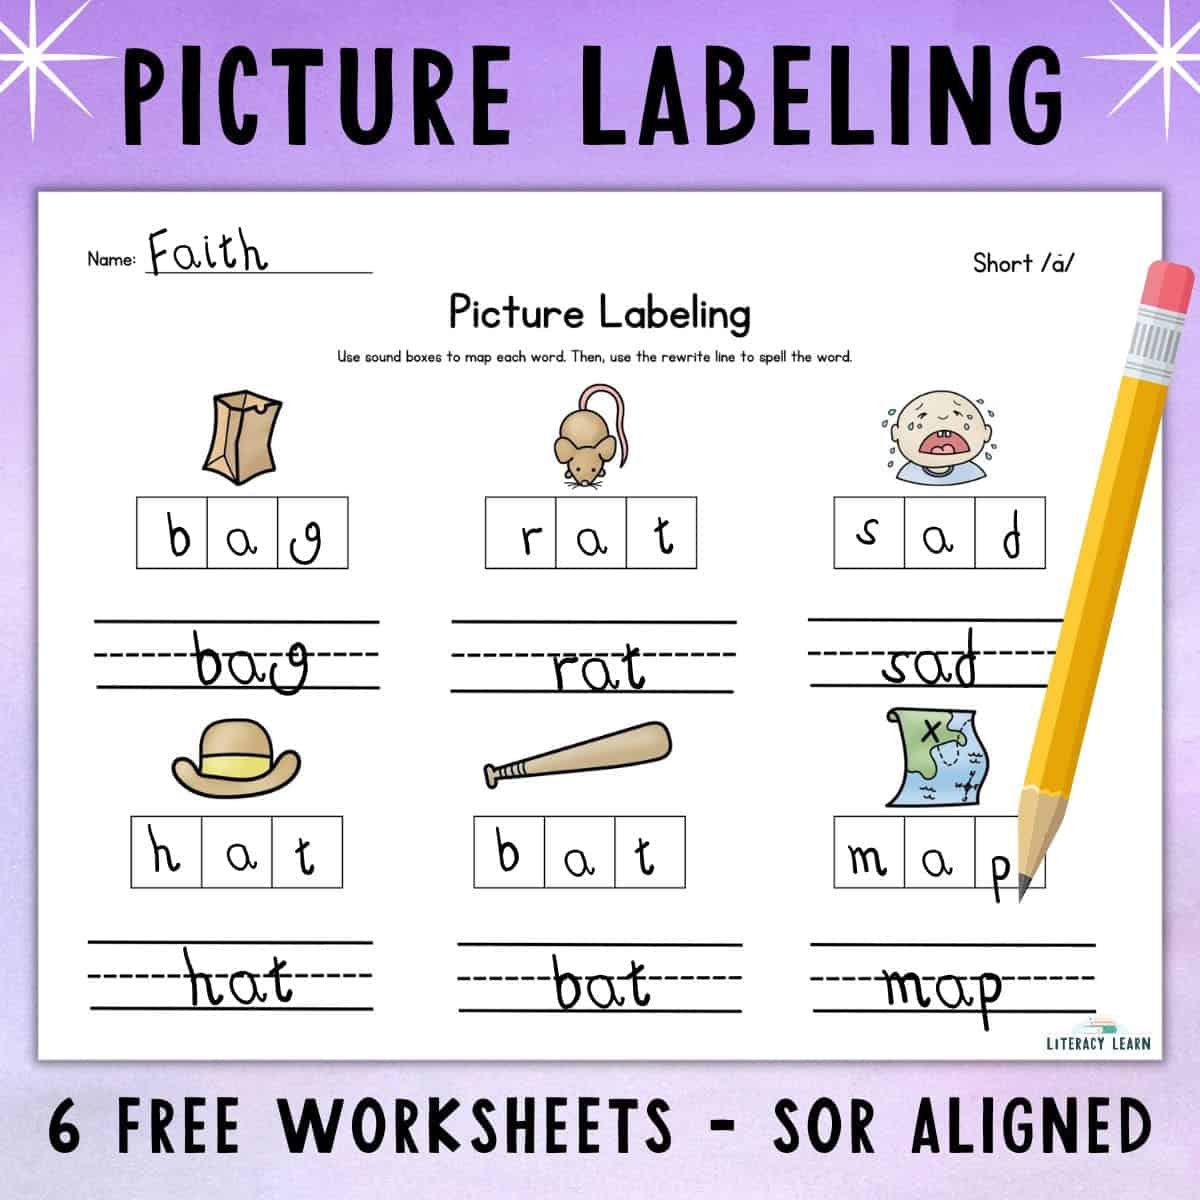 Image with title "Picture Labeling 6 Free Worksheets - SOR aligned" with sample worksheet and pencil.